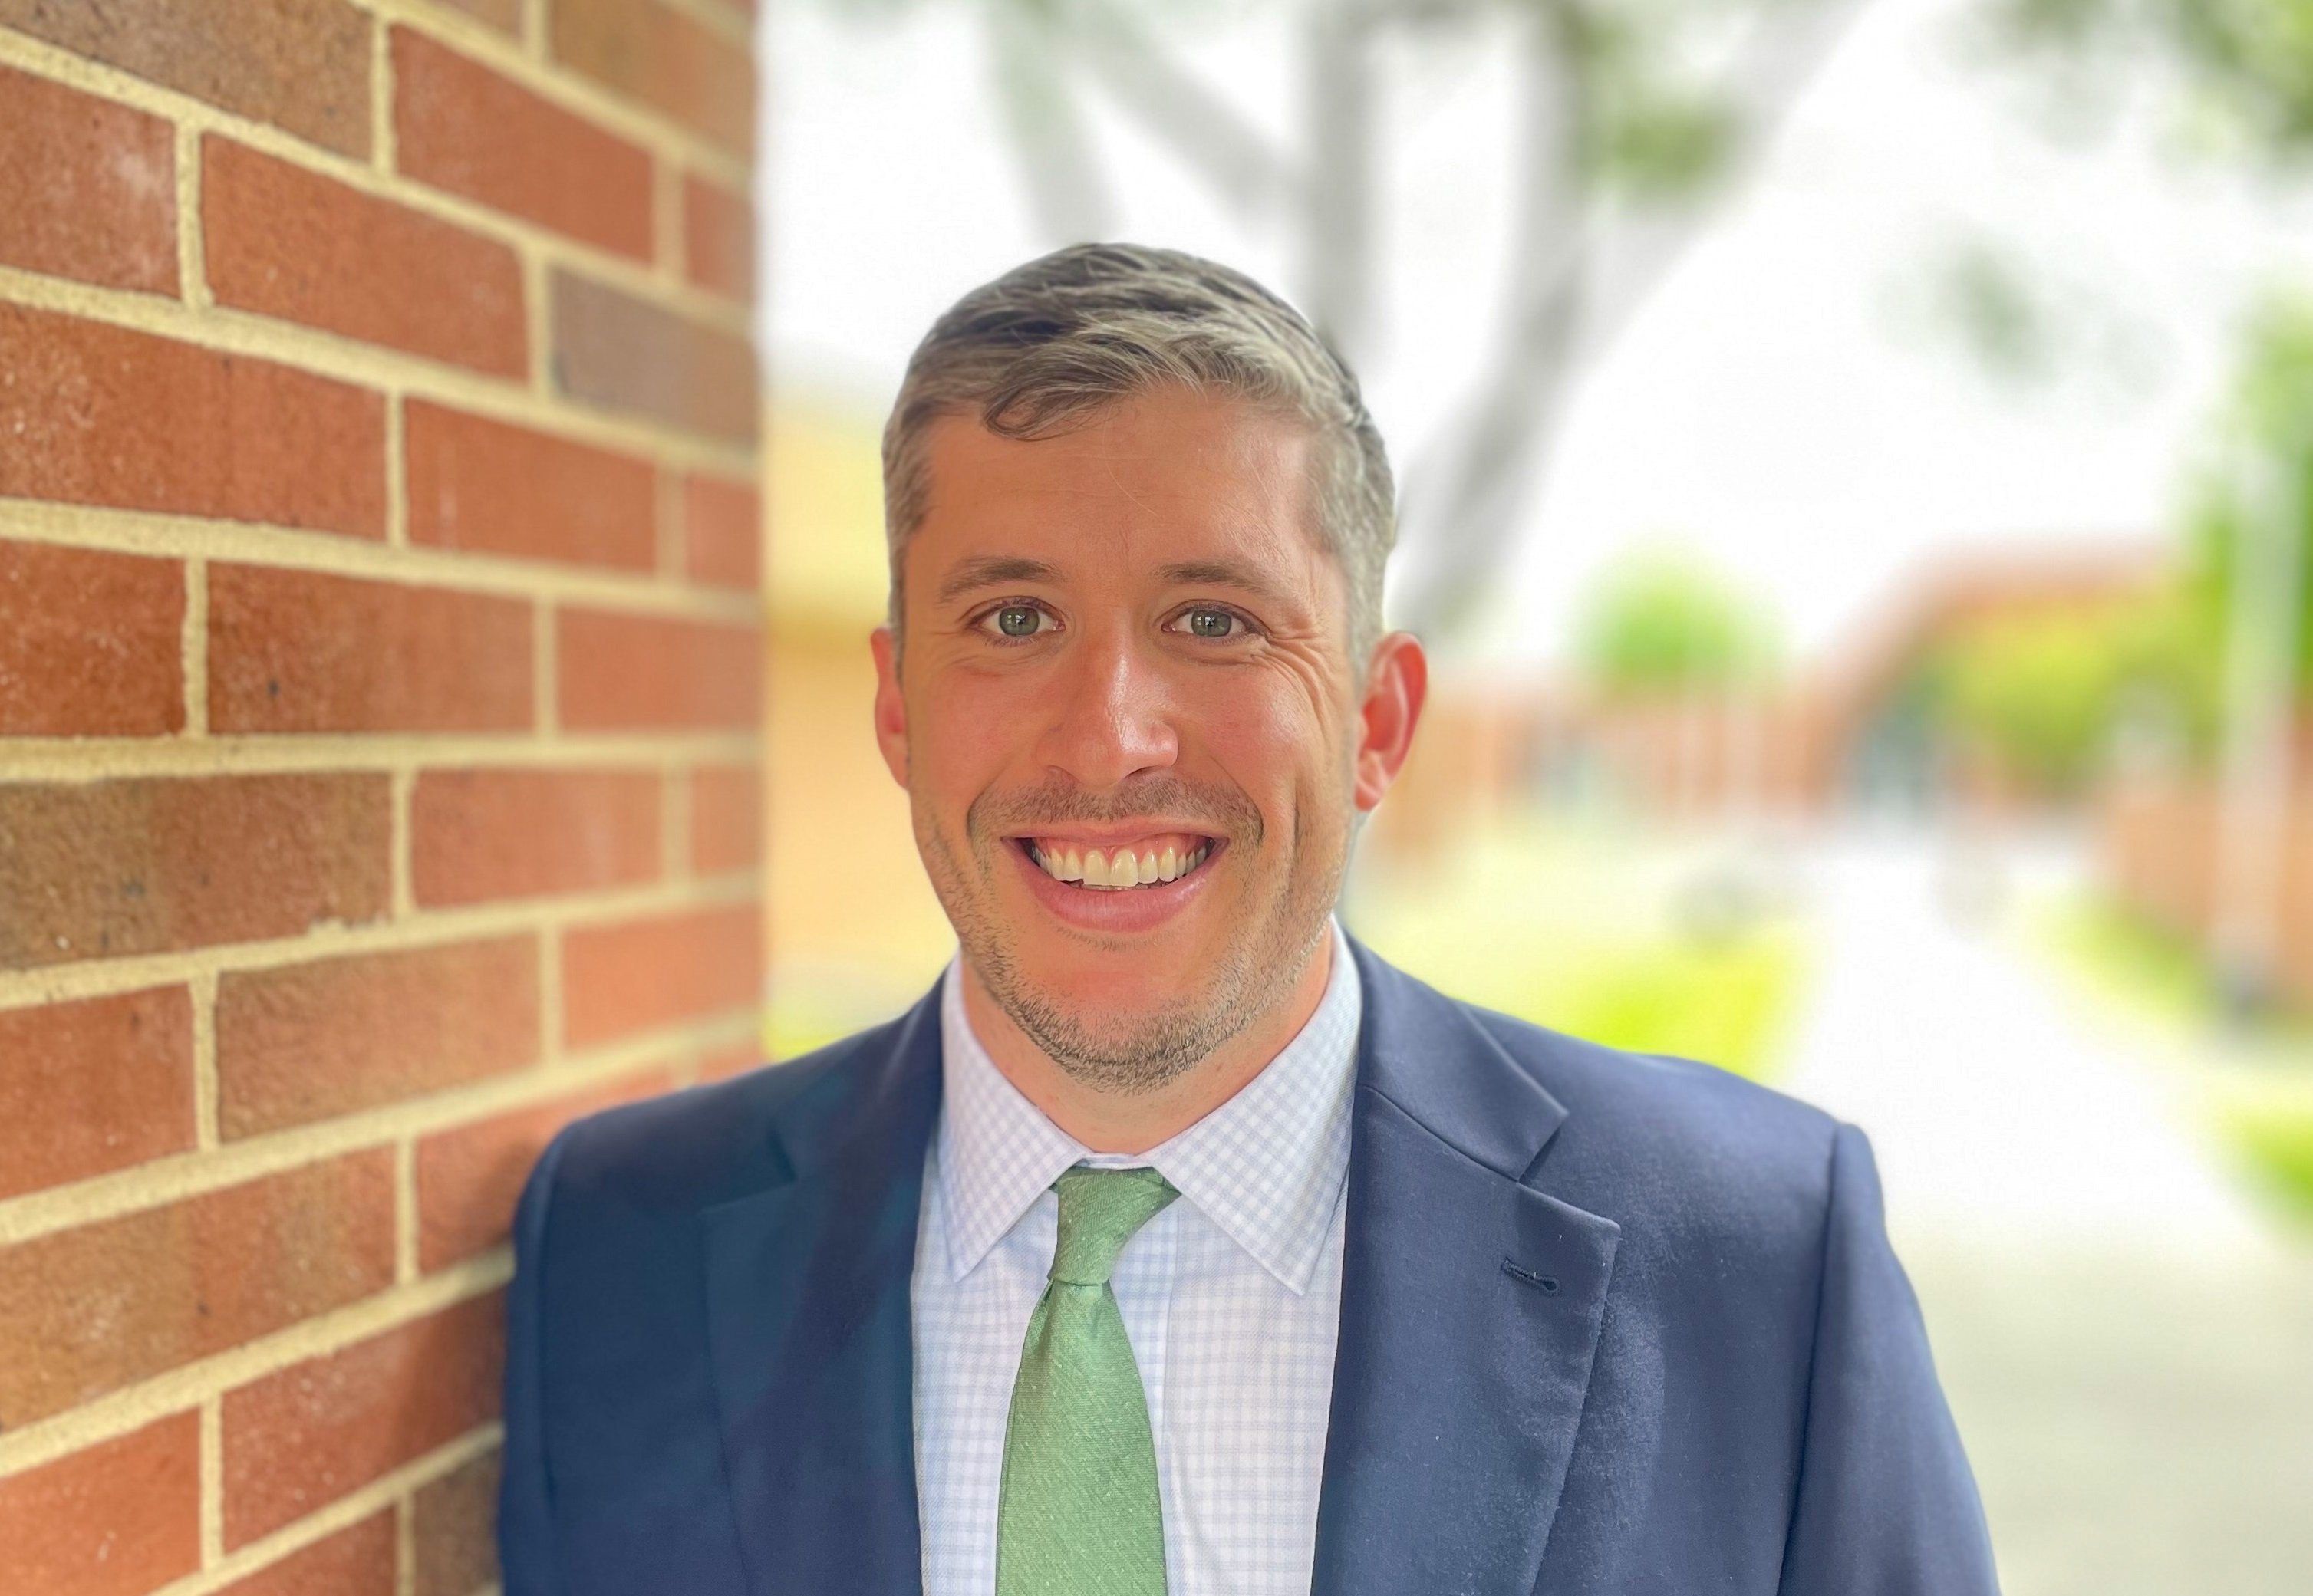 John Cunningham has been hired as director of Healthcare Partnerships at Nashville State Community College, and will focus on building successes by taking engagement and coordination to the next level through Nashville State’s Center for Workforce Development and Continuing Education program